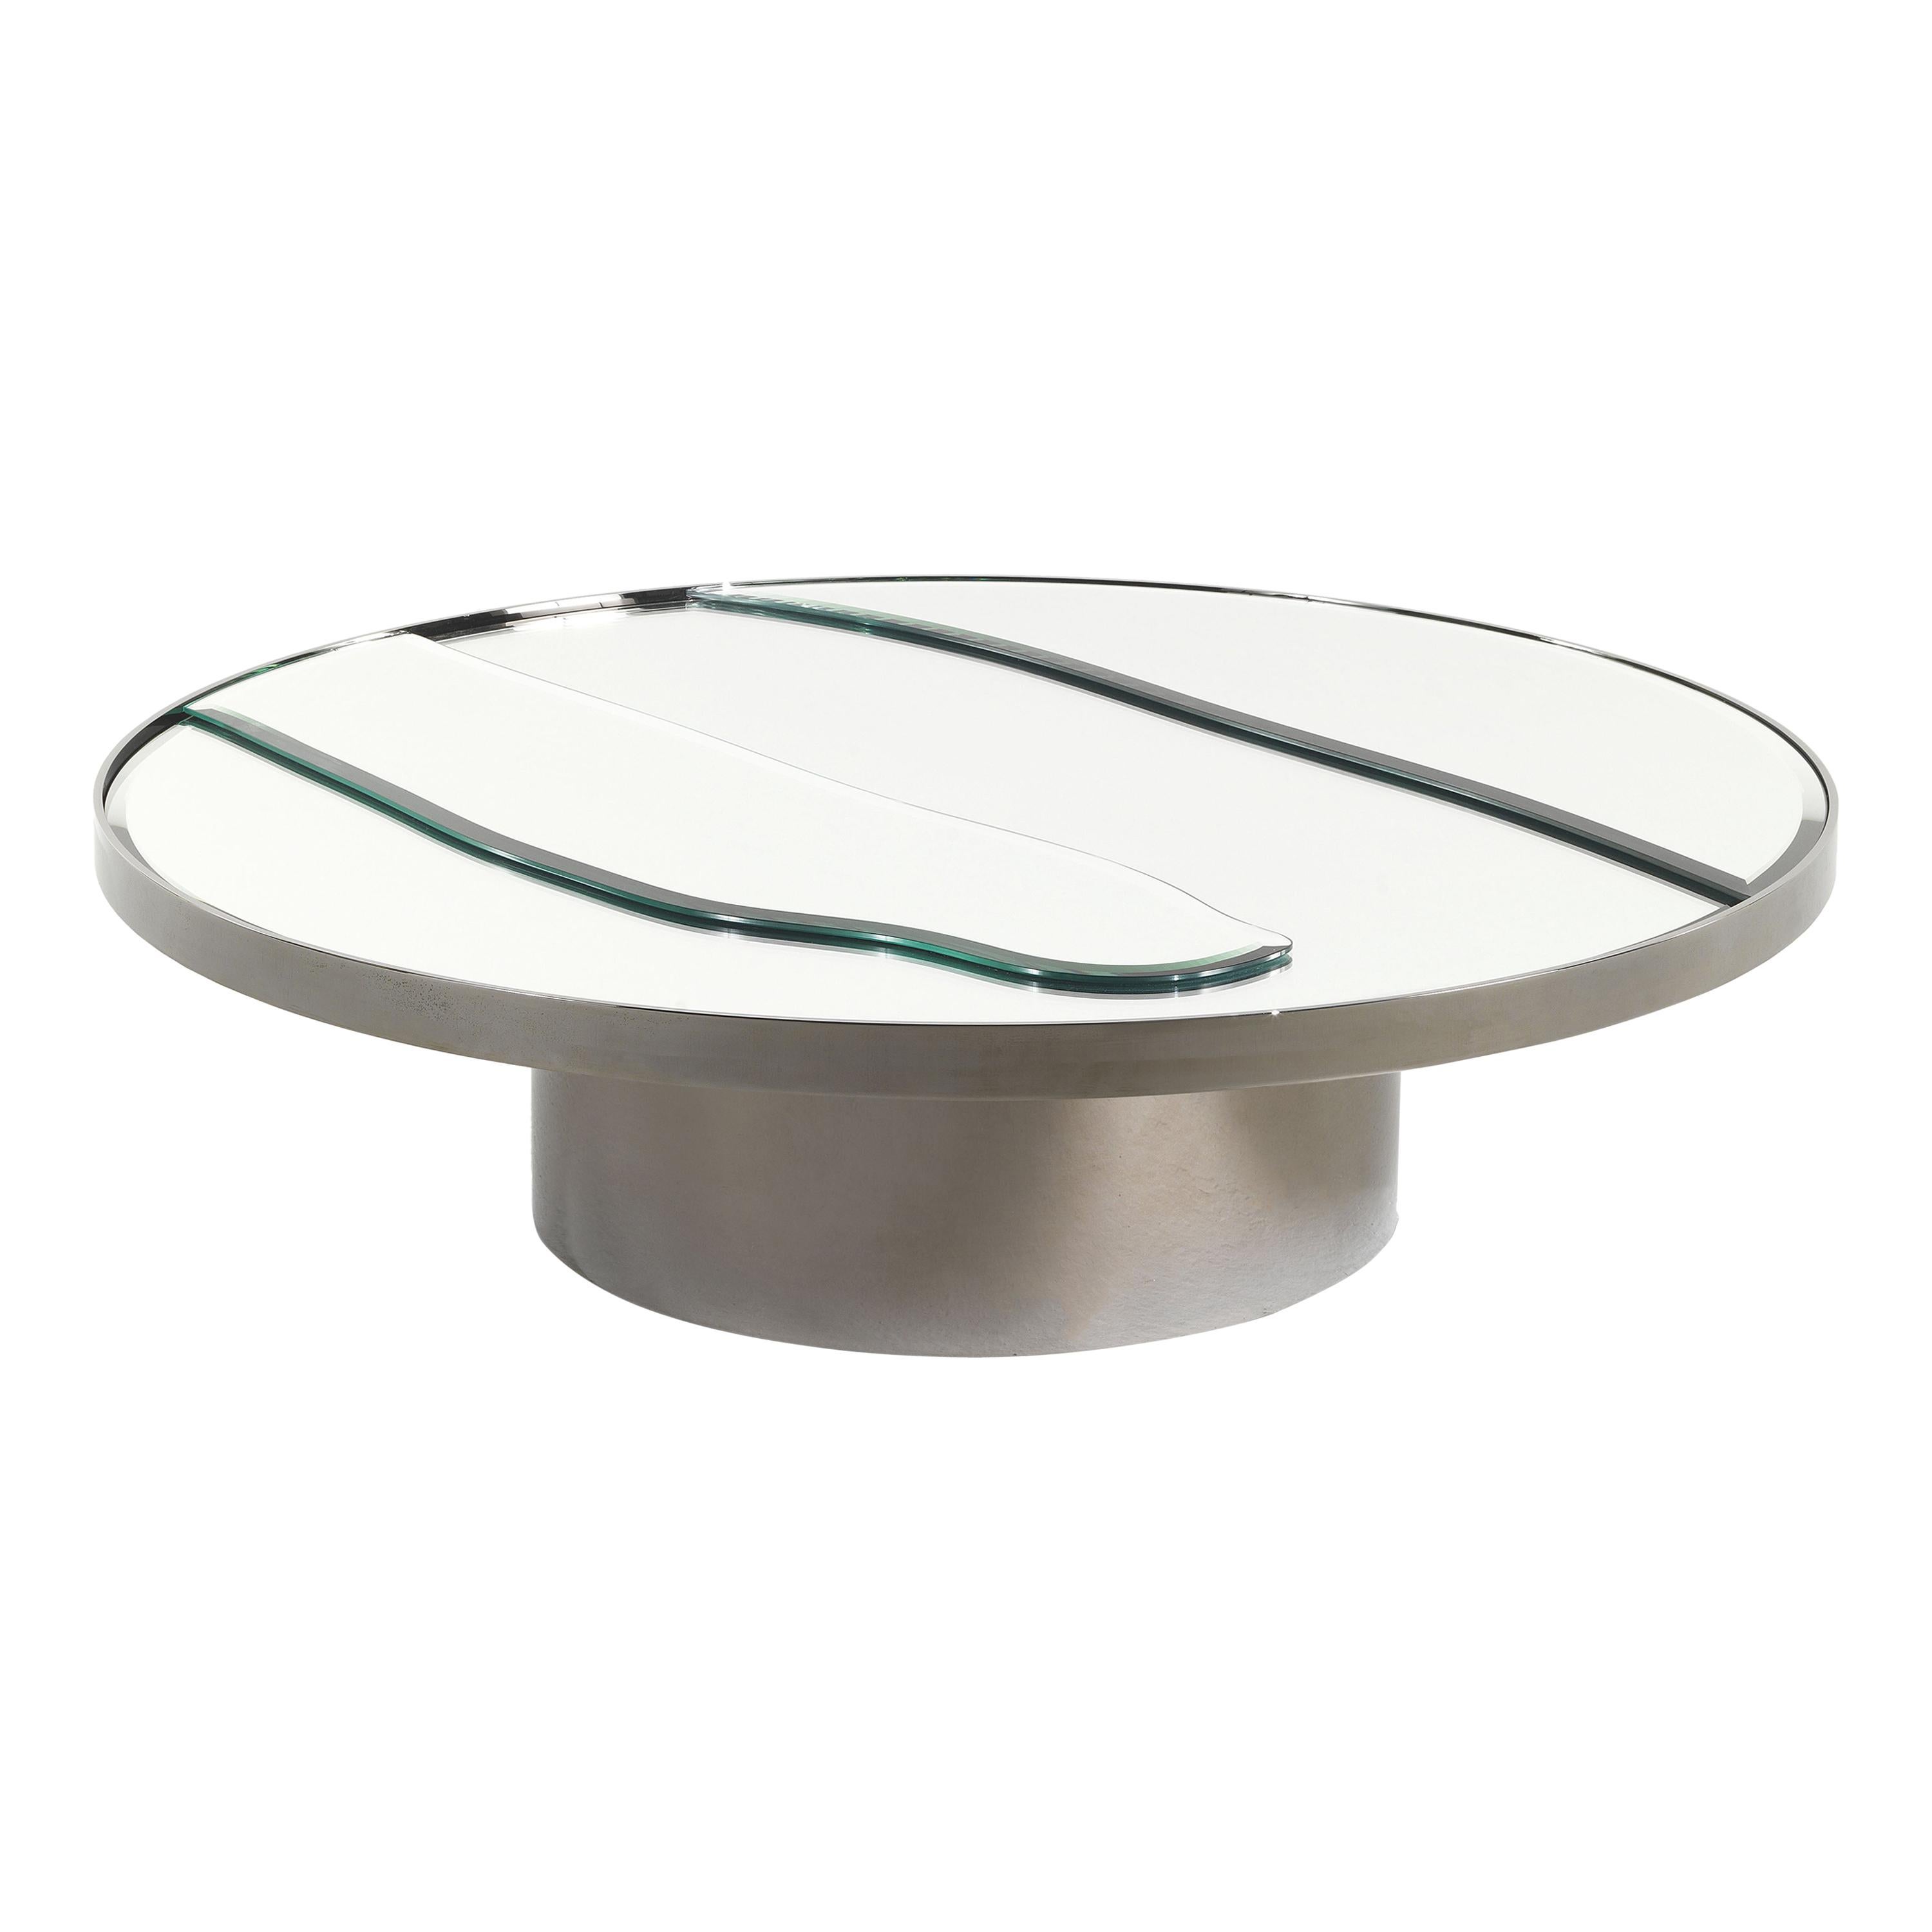 21st Century Sahara Central Table in Metal by Roberto Cavalli Home Interiors